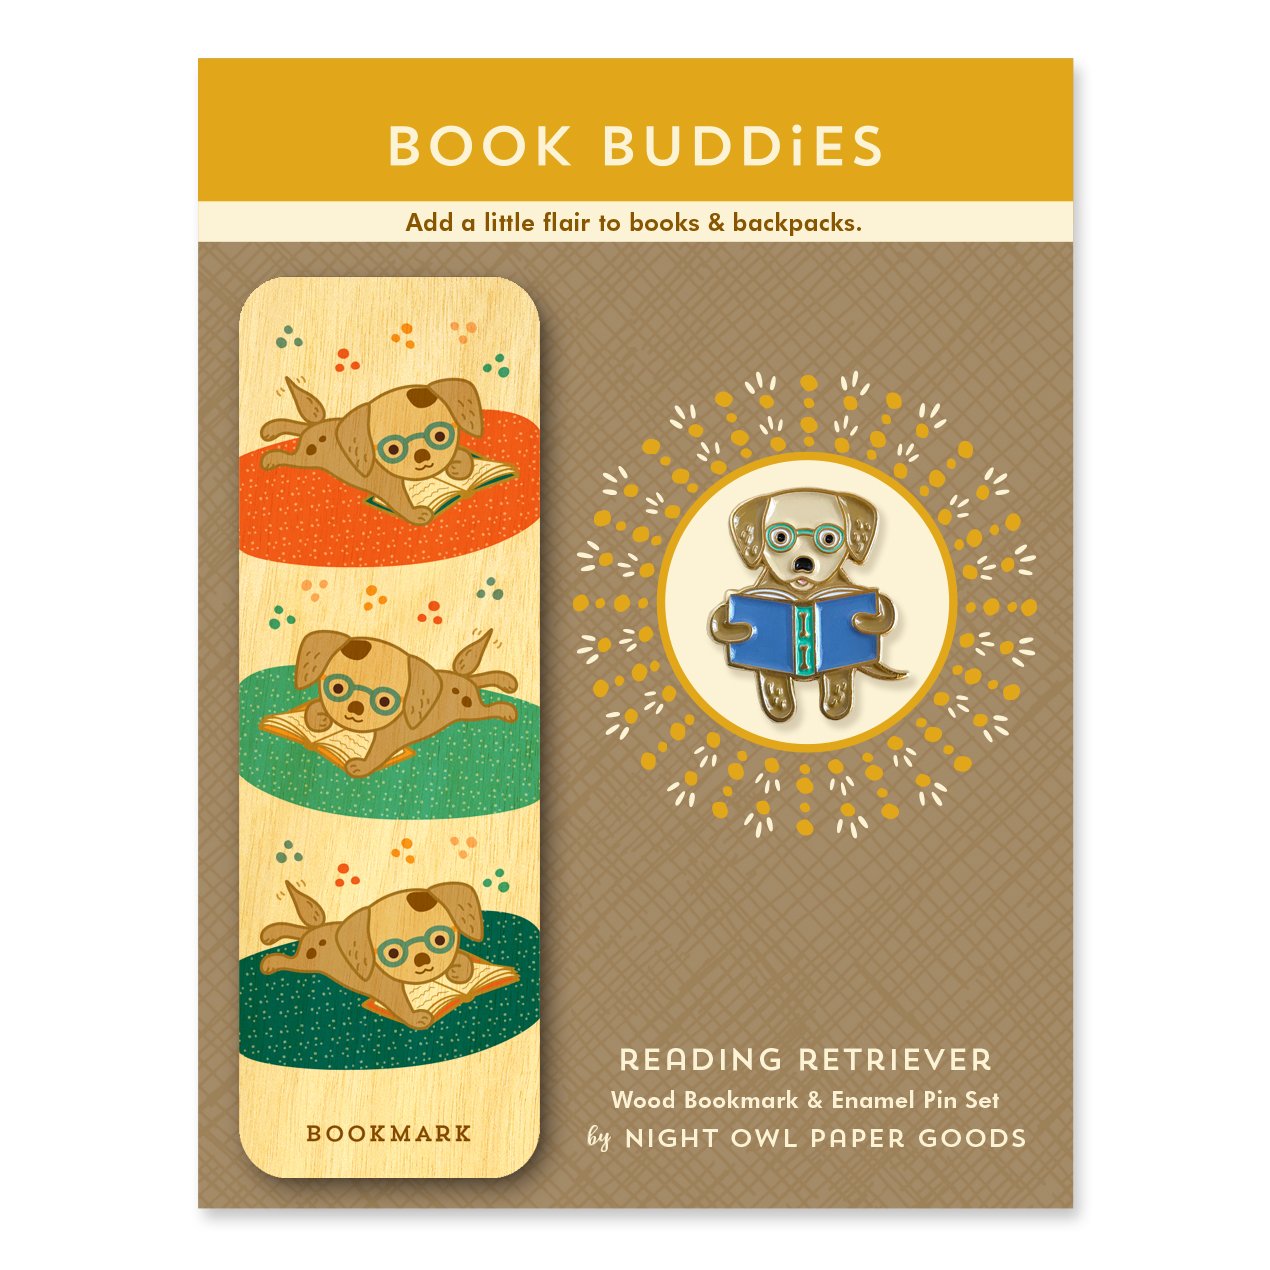 Pin on books for littles